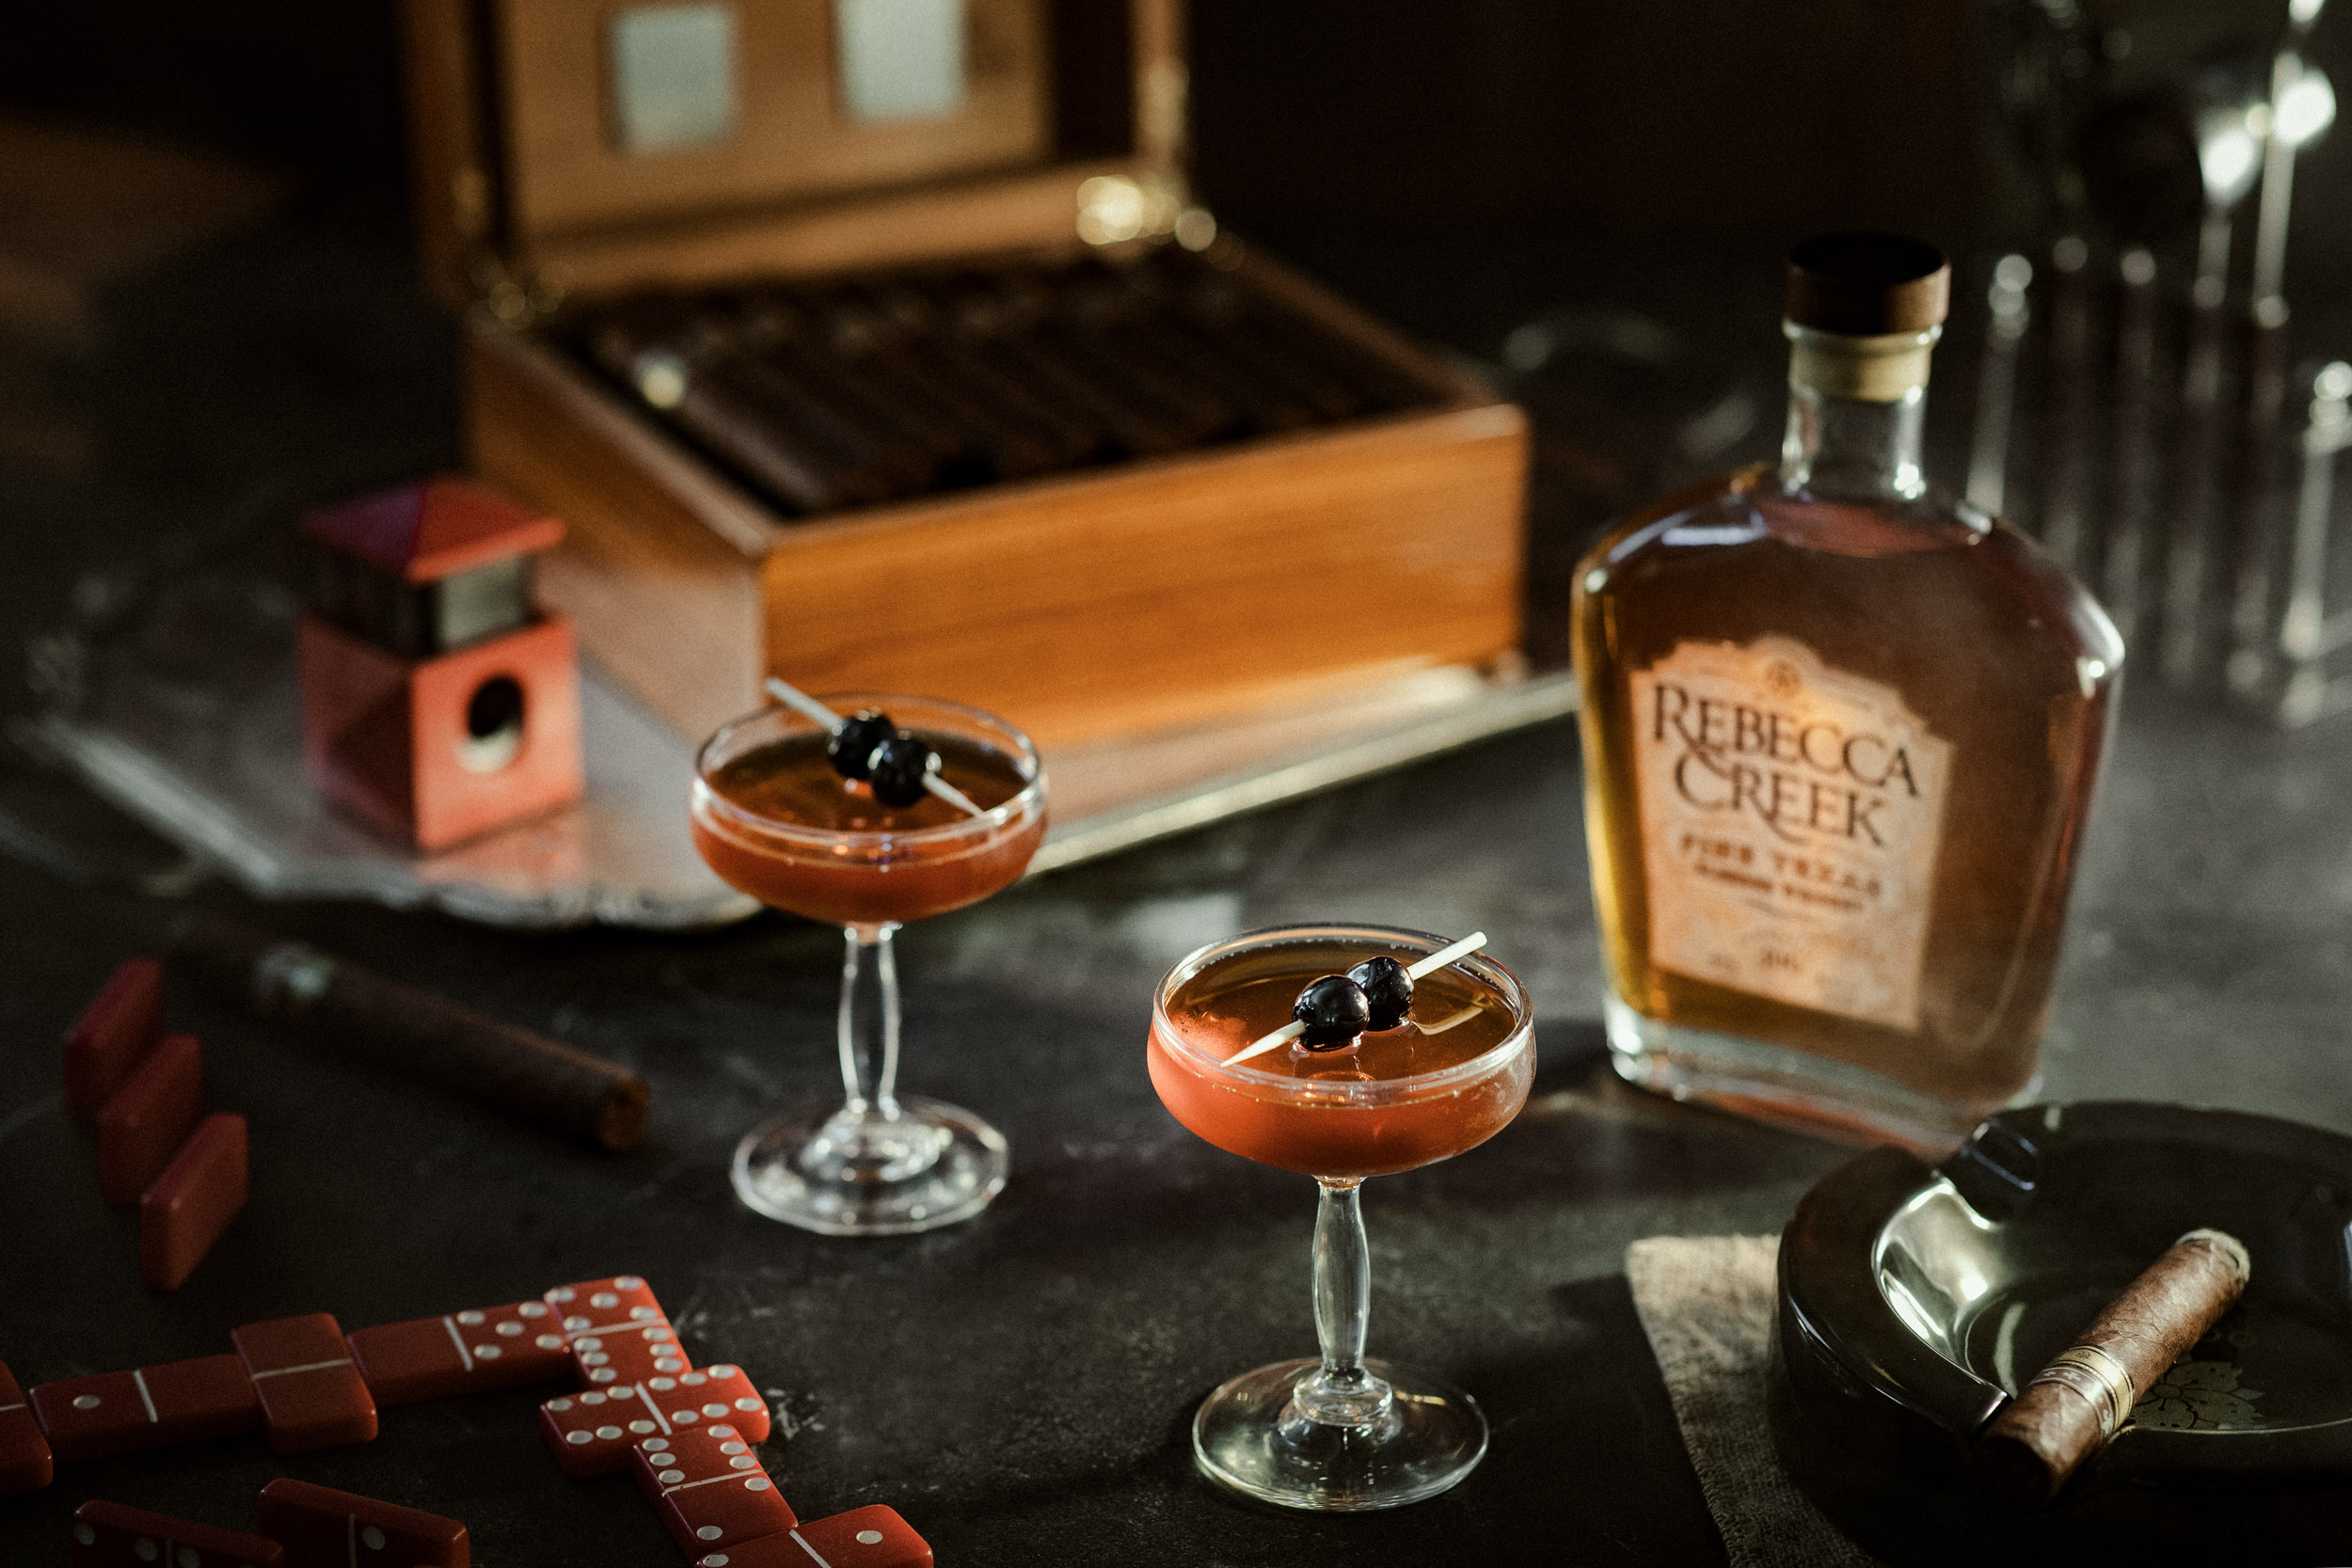 two cocktails in coupe glasses with cigar box and rebecca creek bottle